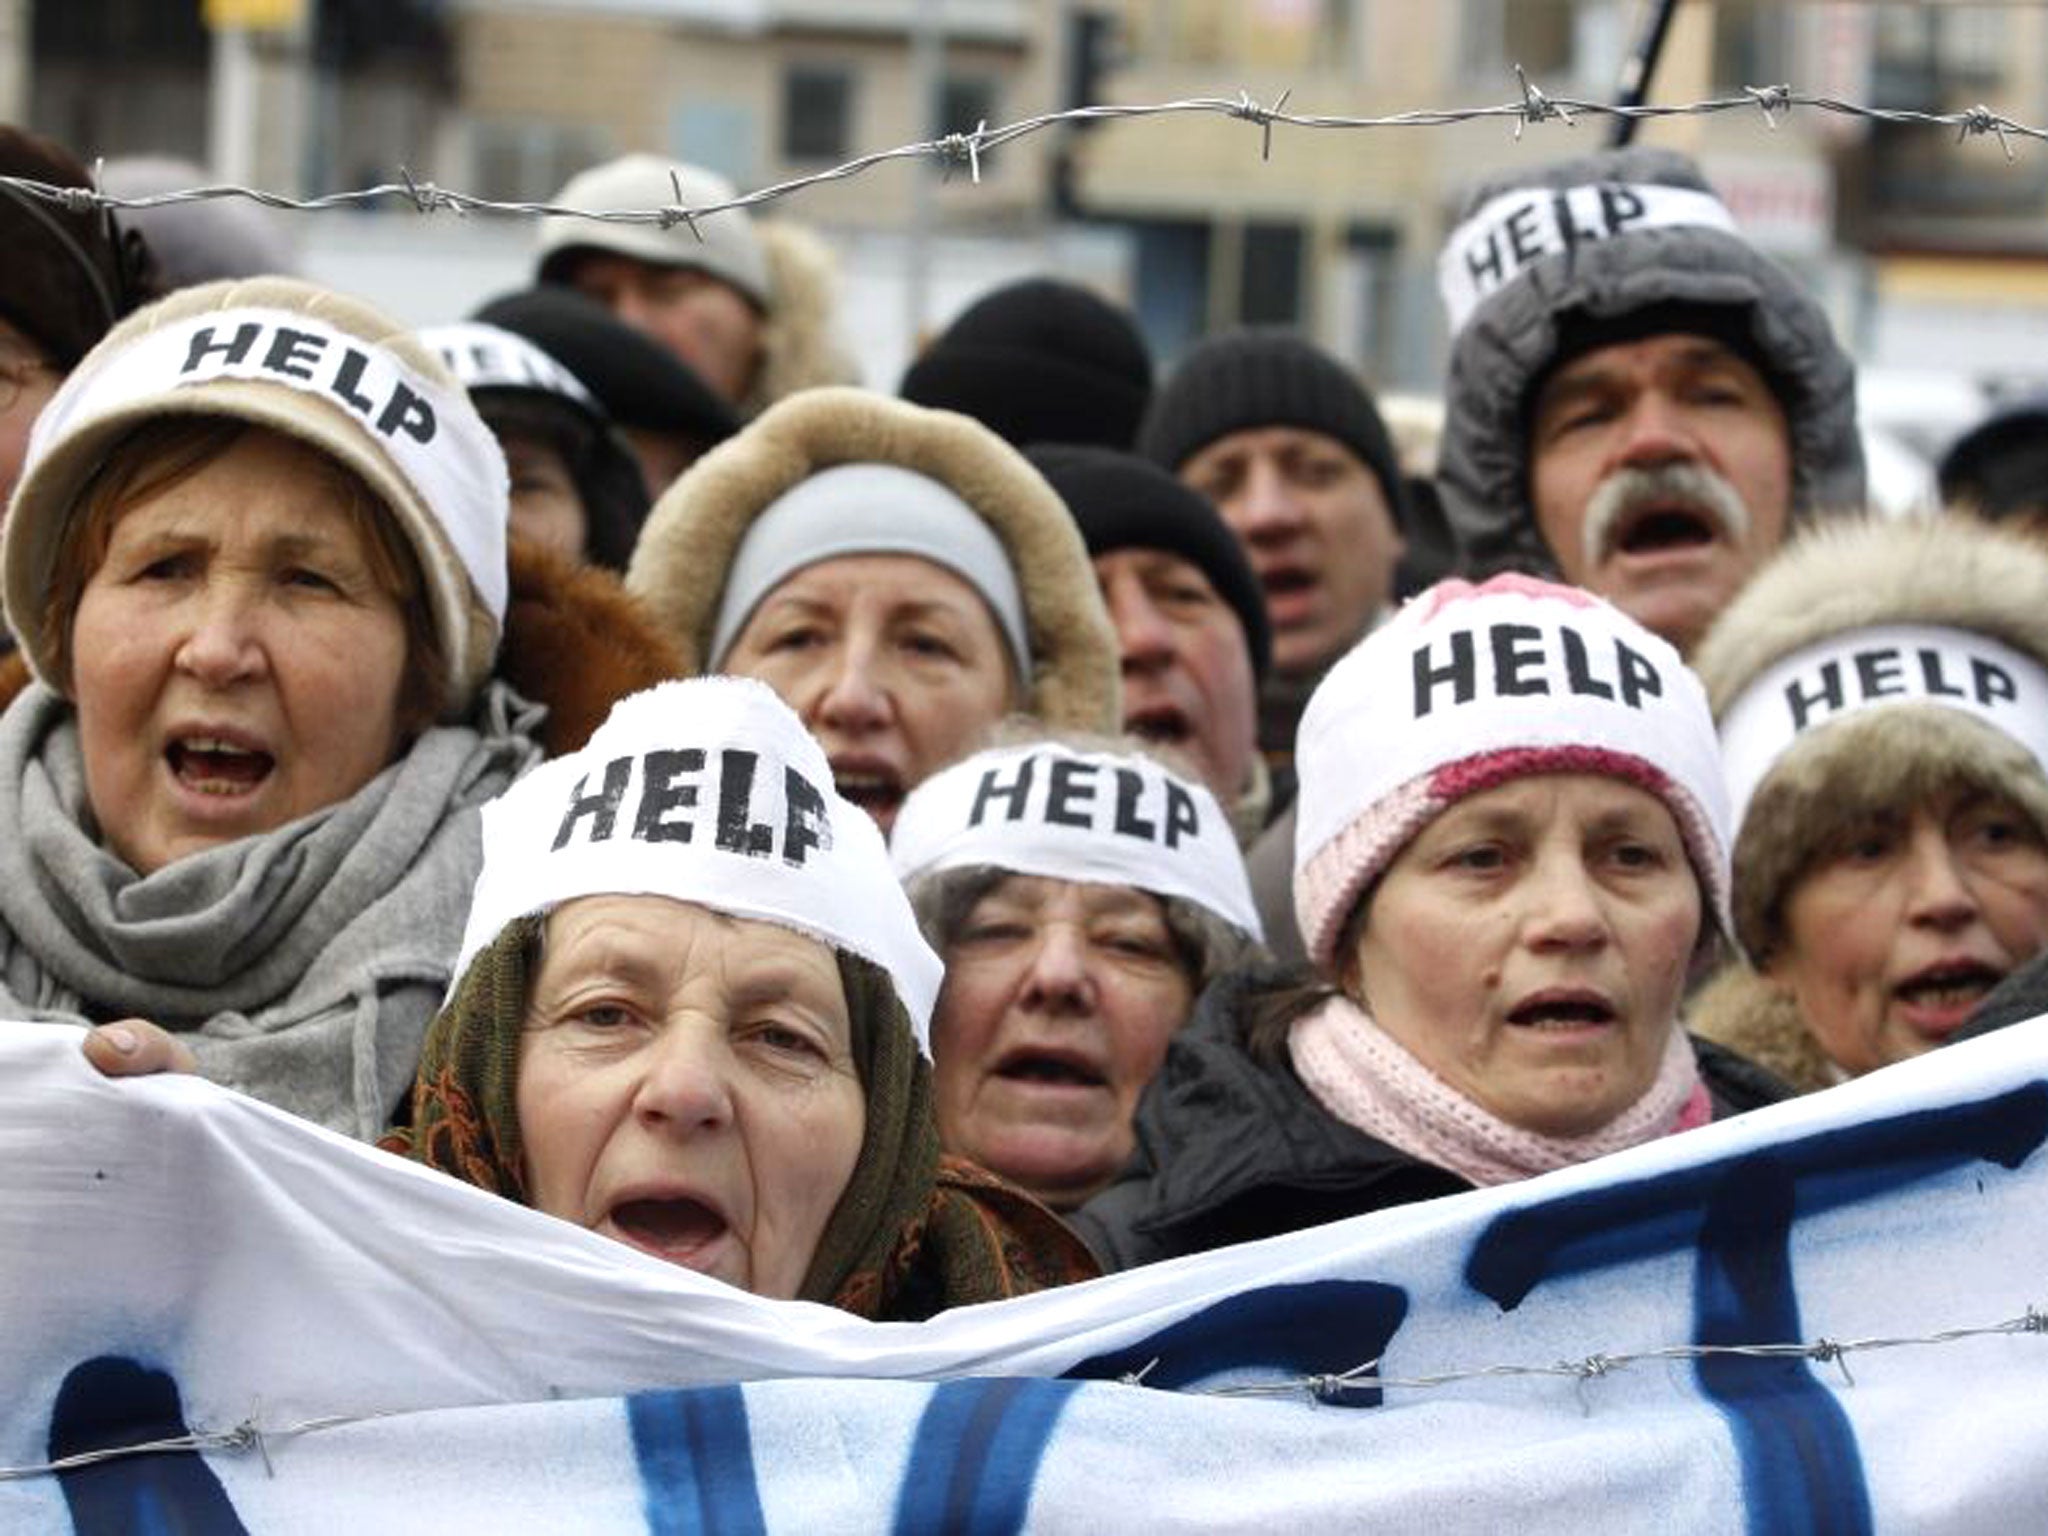 Protesters wearing headbands reading 'Help' shout slogans during an action entitled 'Impose sanctions - stop the violence' in front of the European Union delegation in Ukraine in Kiev.